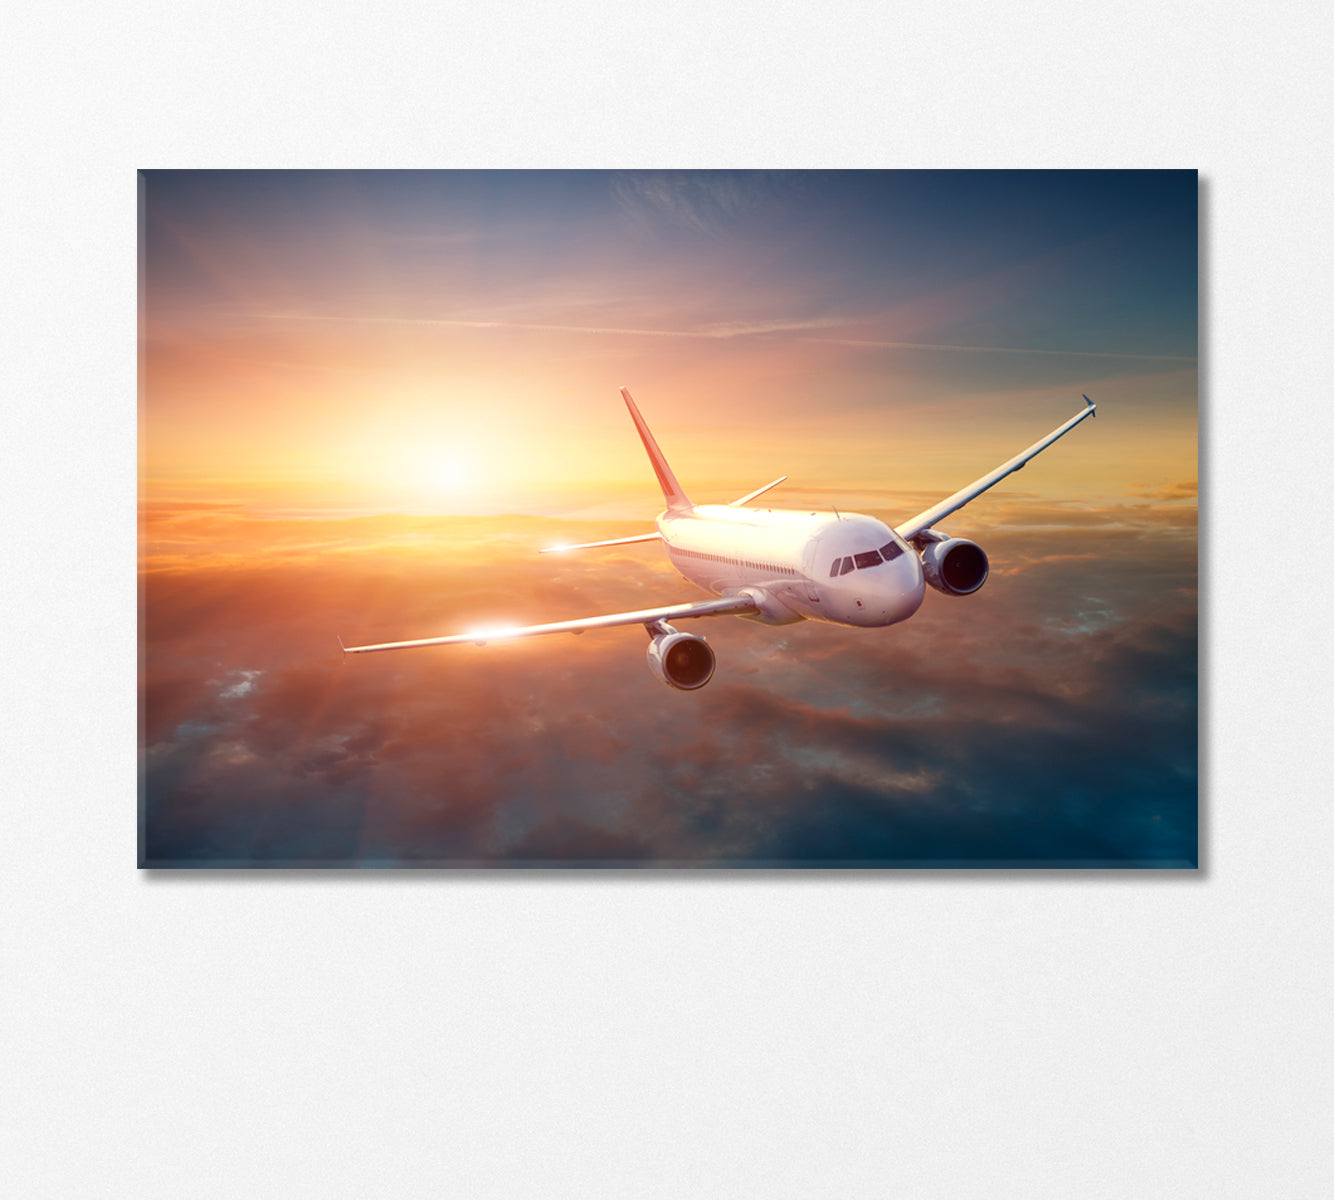 Airplane in Sky at Sunset Canvas Print-Canvas Print-CetArt-1 Panel-24x16 inches-CetArt